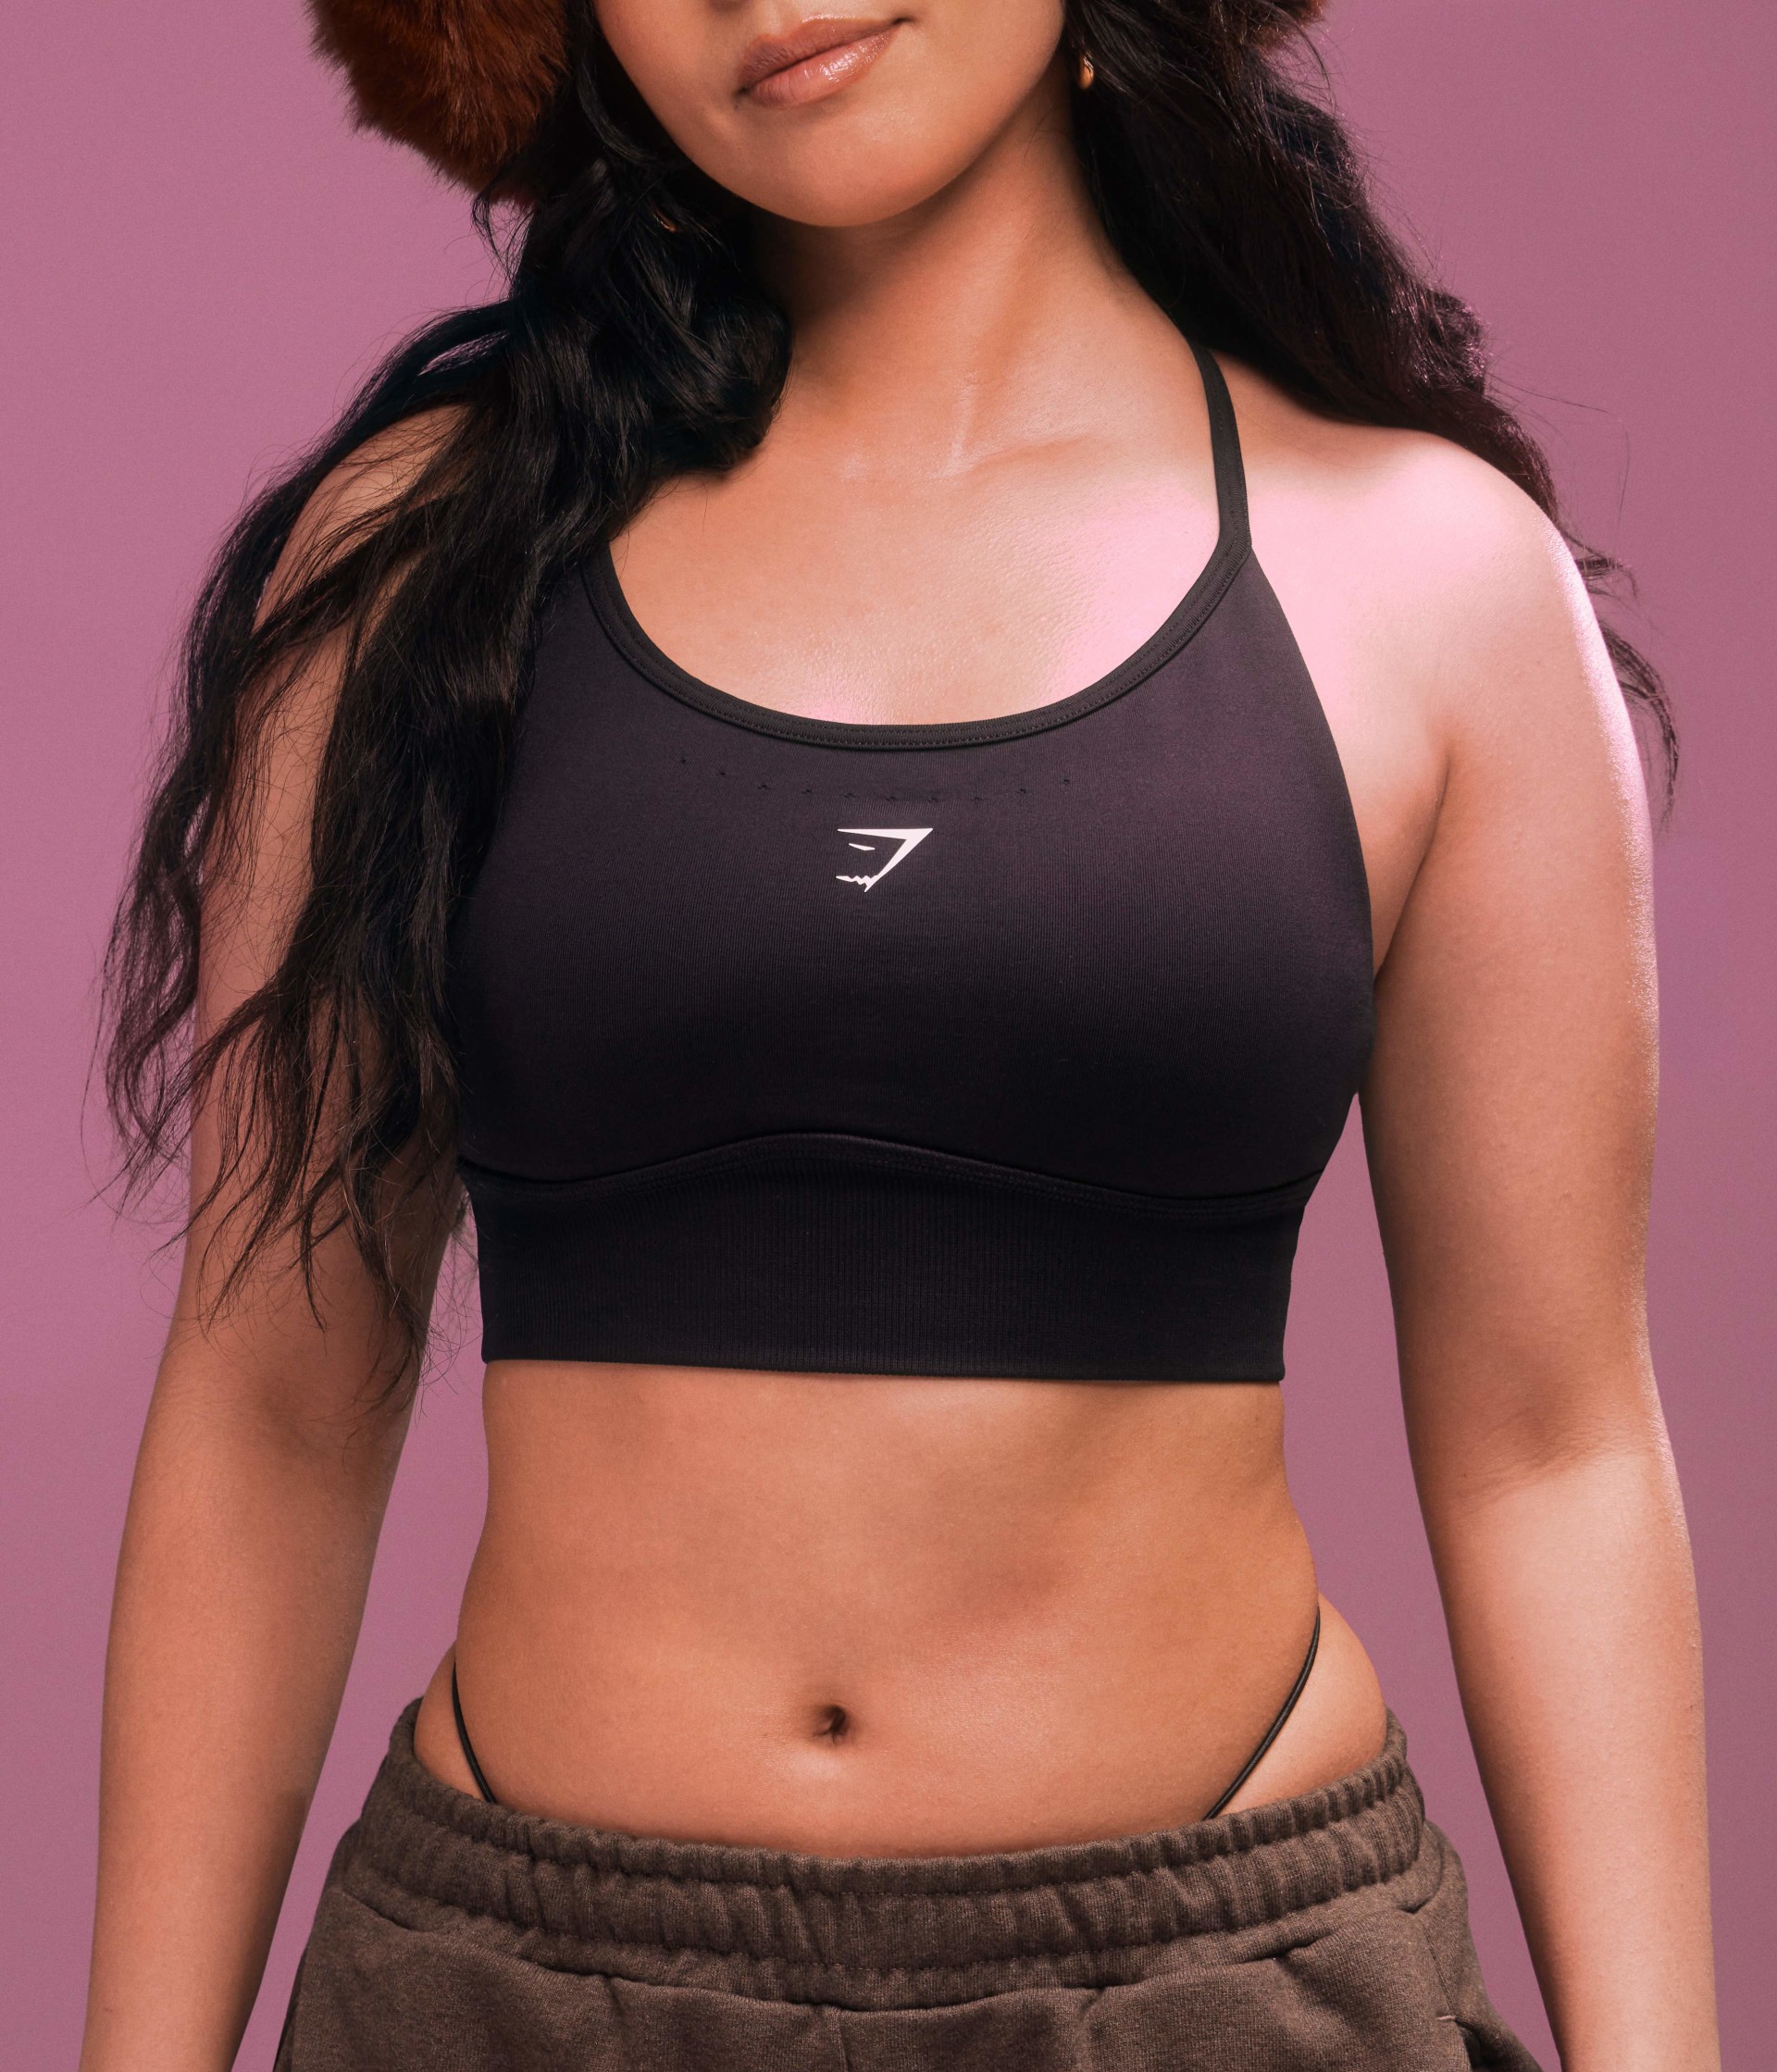 Valkyrae announces she's one of the new faces of fitness brand Gymshark